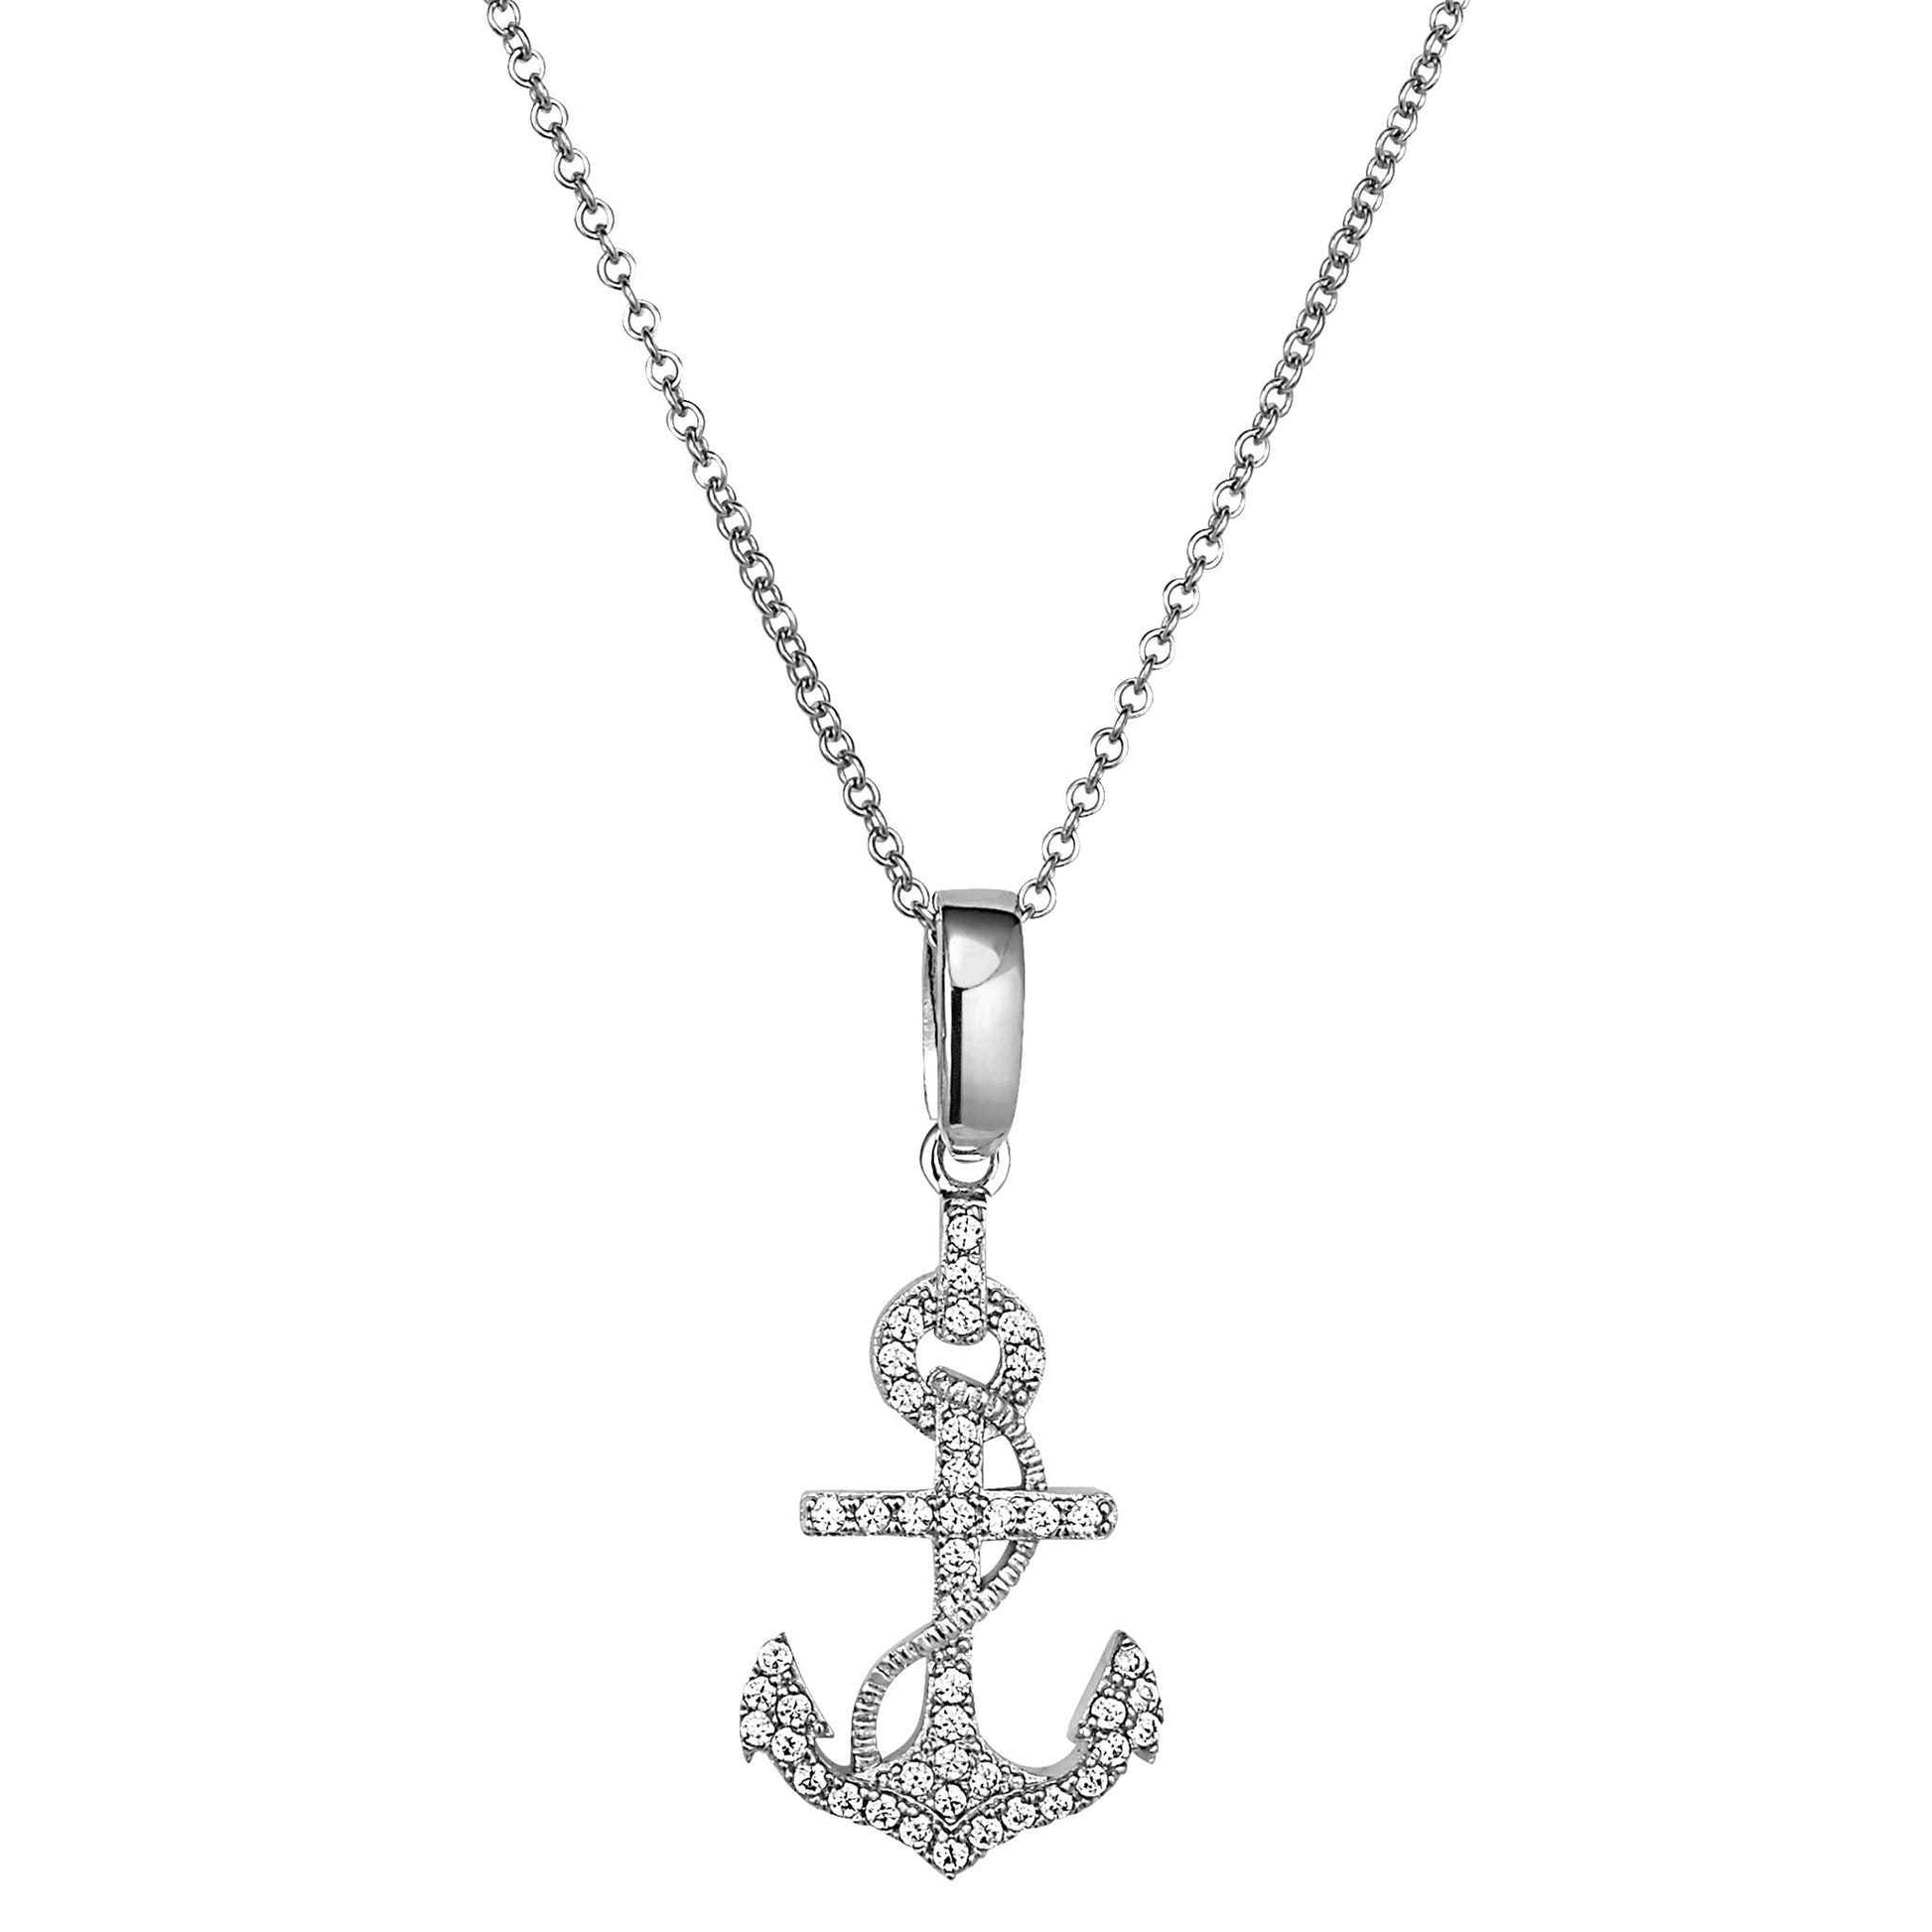 A sterling silver anchor necklace with simulated diamonds displayed on a neutral white background.